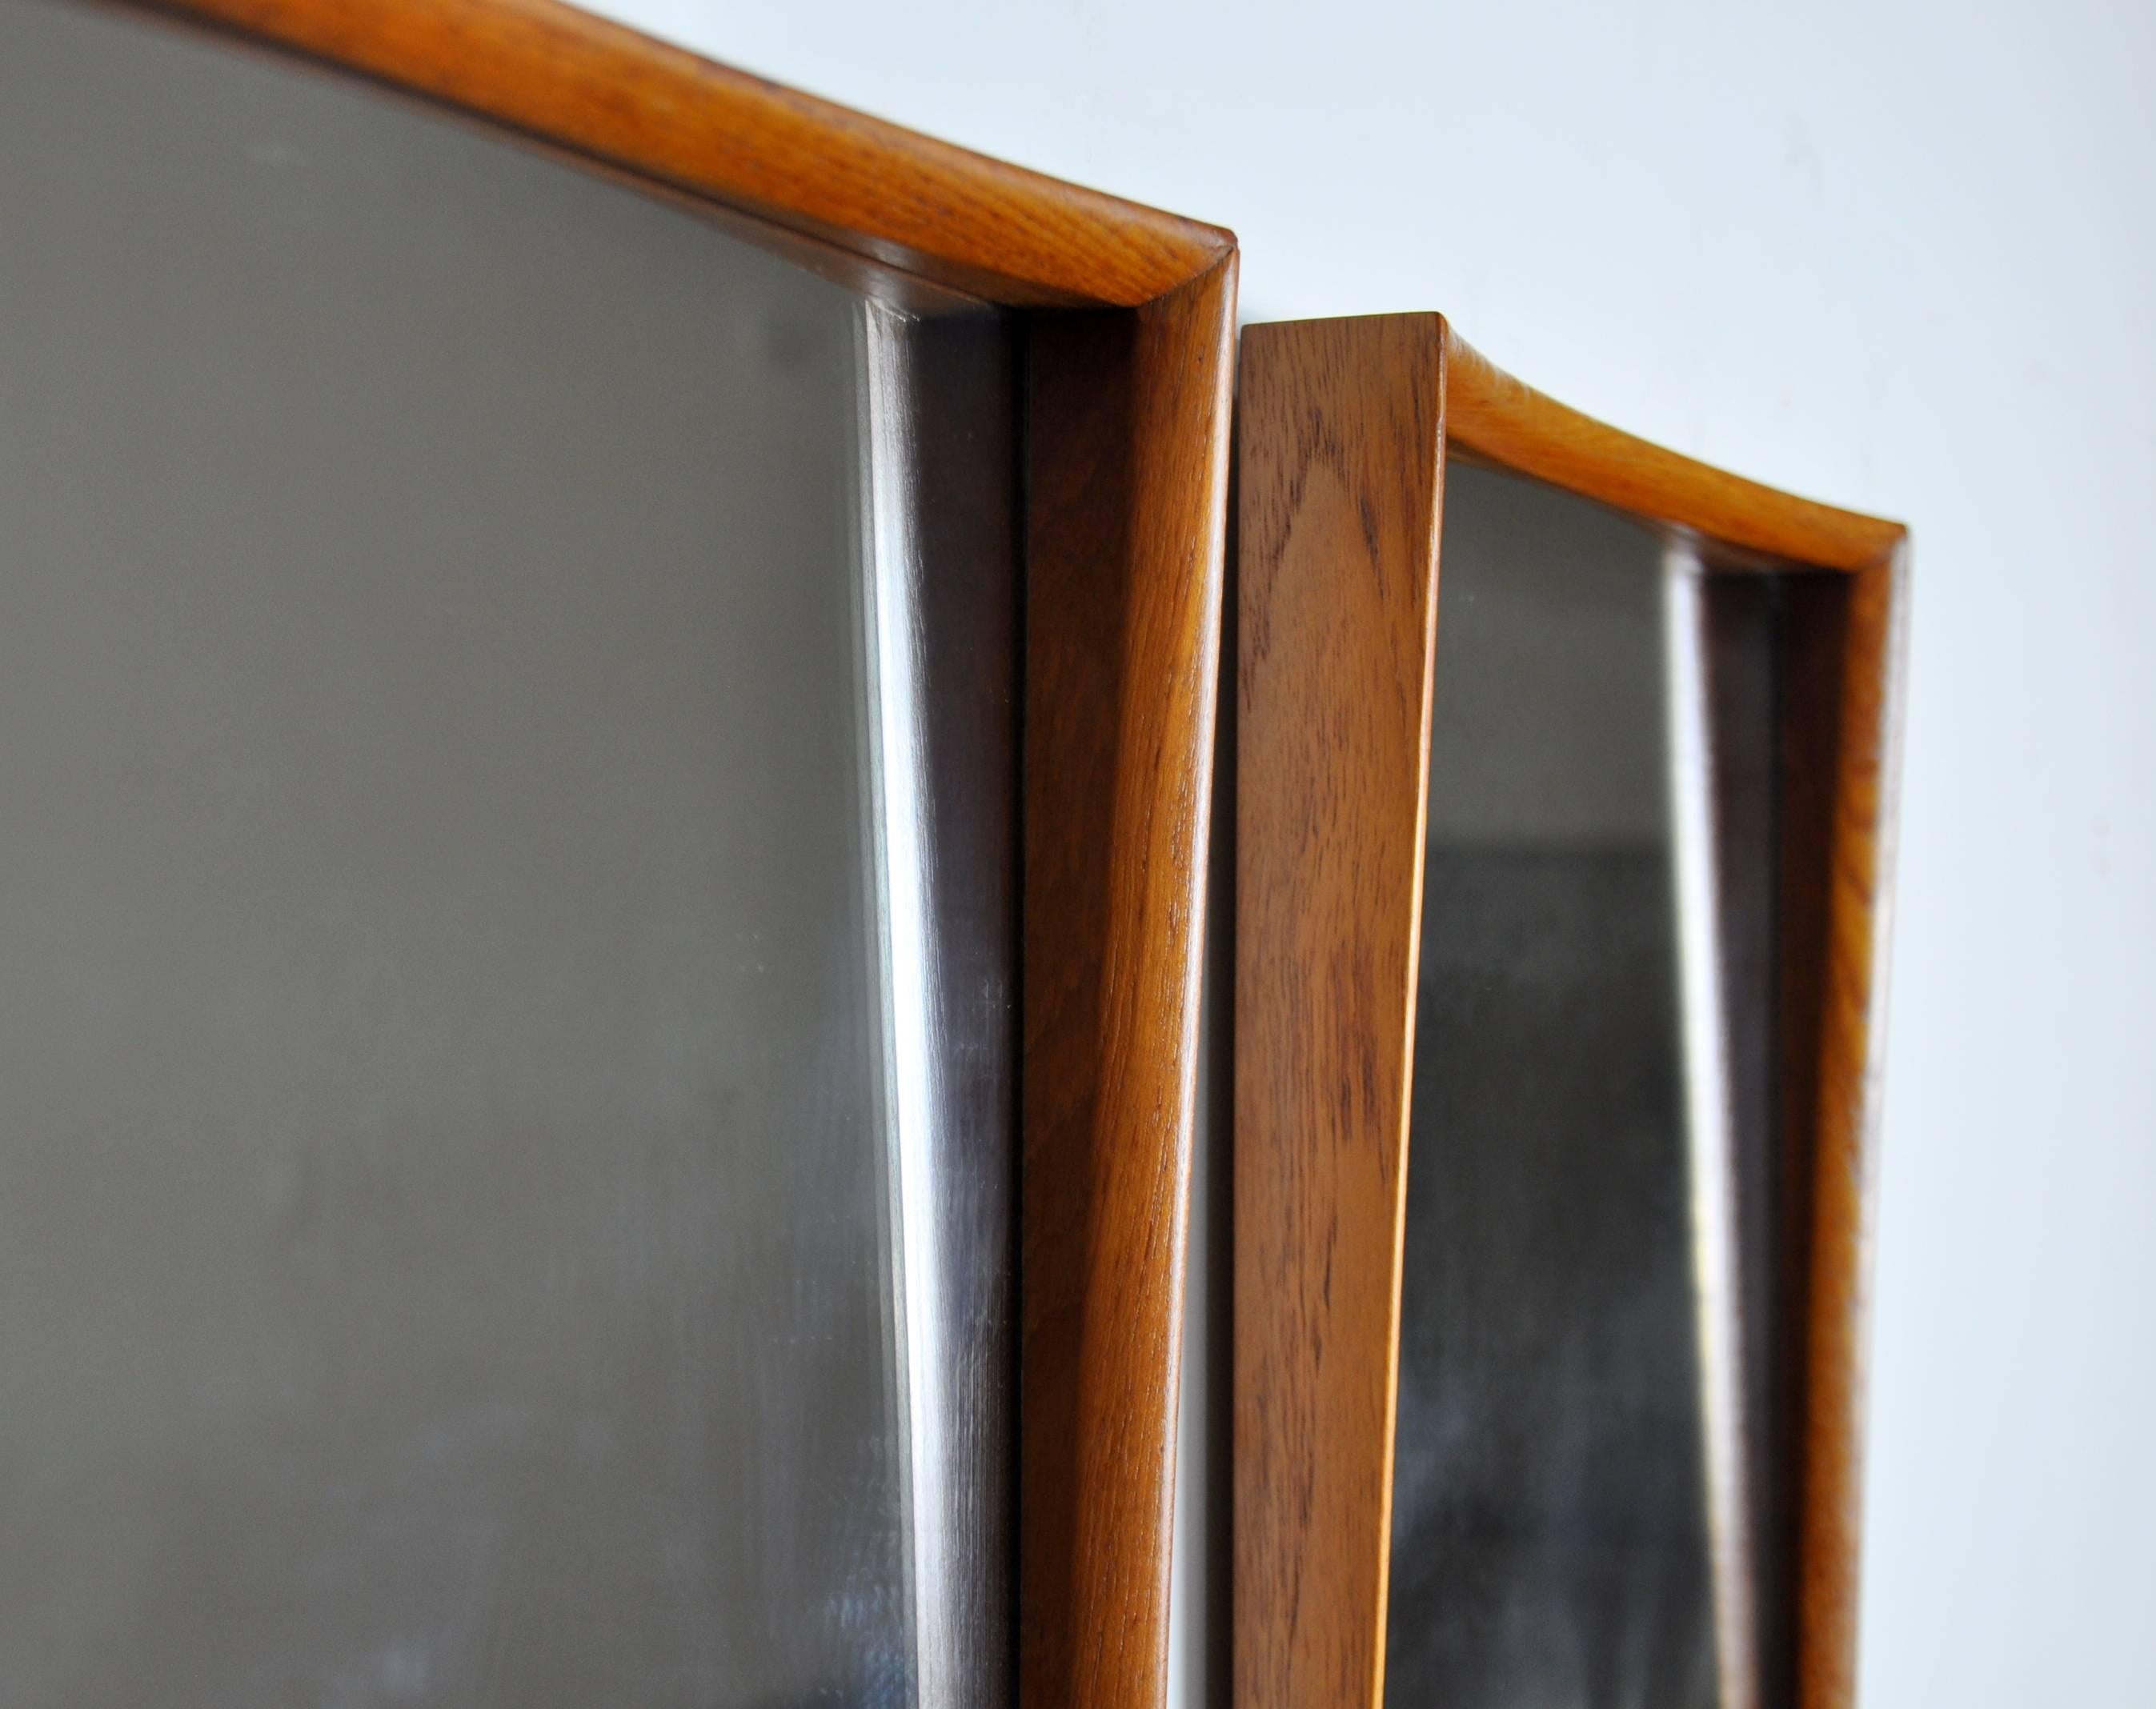 A gorgeous pair of vintage Danish Modern sculptural mirrors with teak frames, designed by Svend Aage Madsen for Falster Mobelfabrik and dating from the 1960s. The sleek frame of each mirror is beautifully sculpted. These could, when placed over a